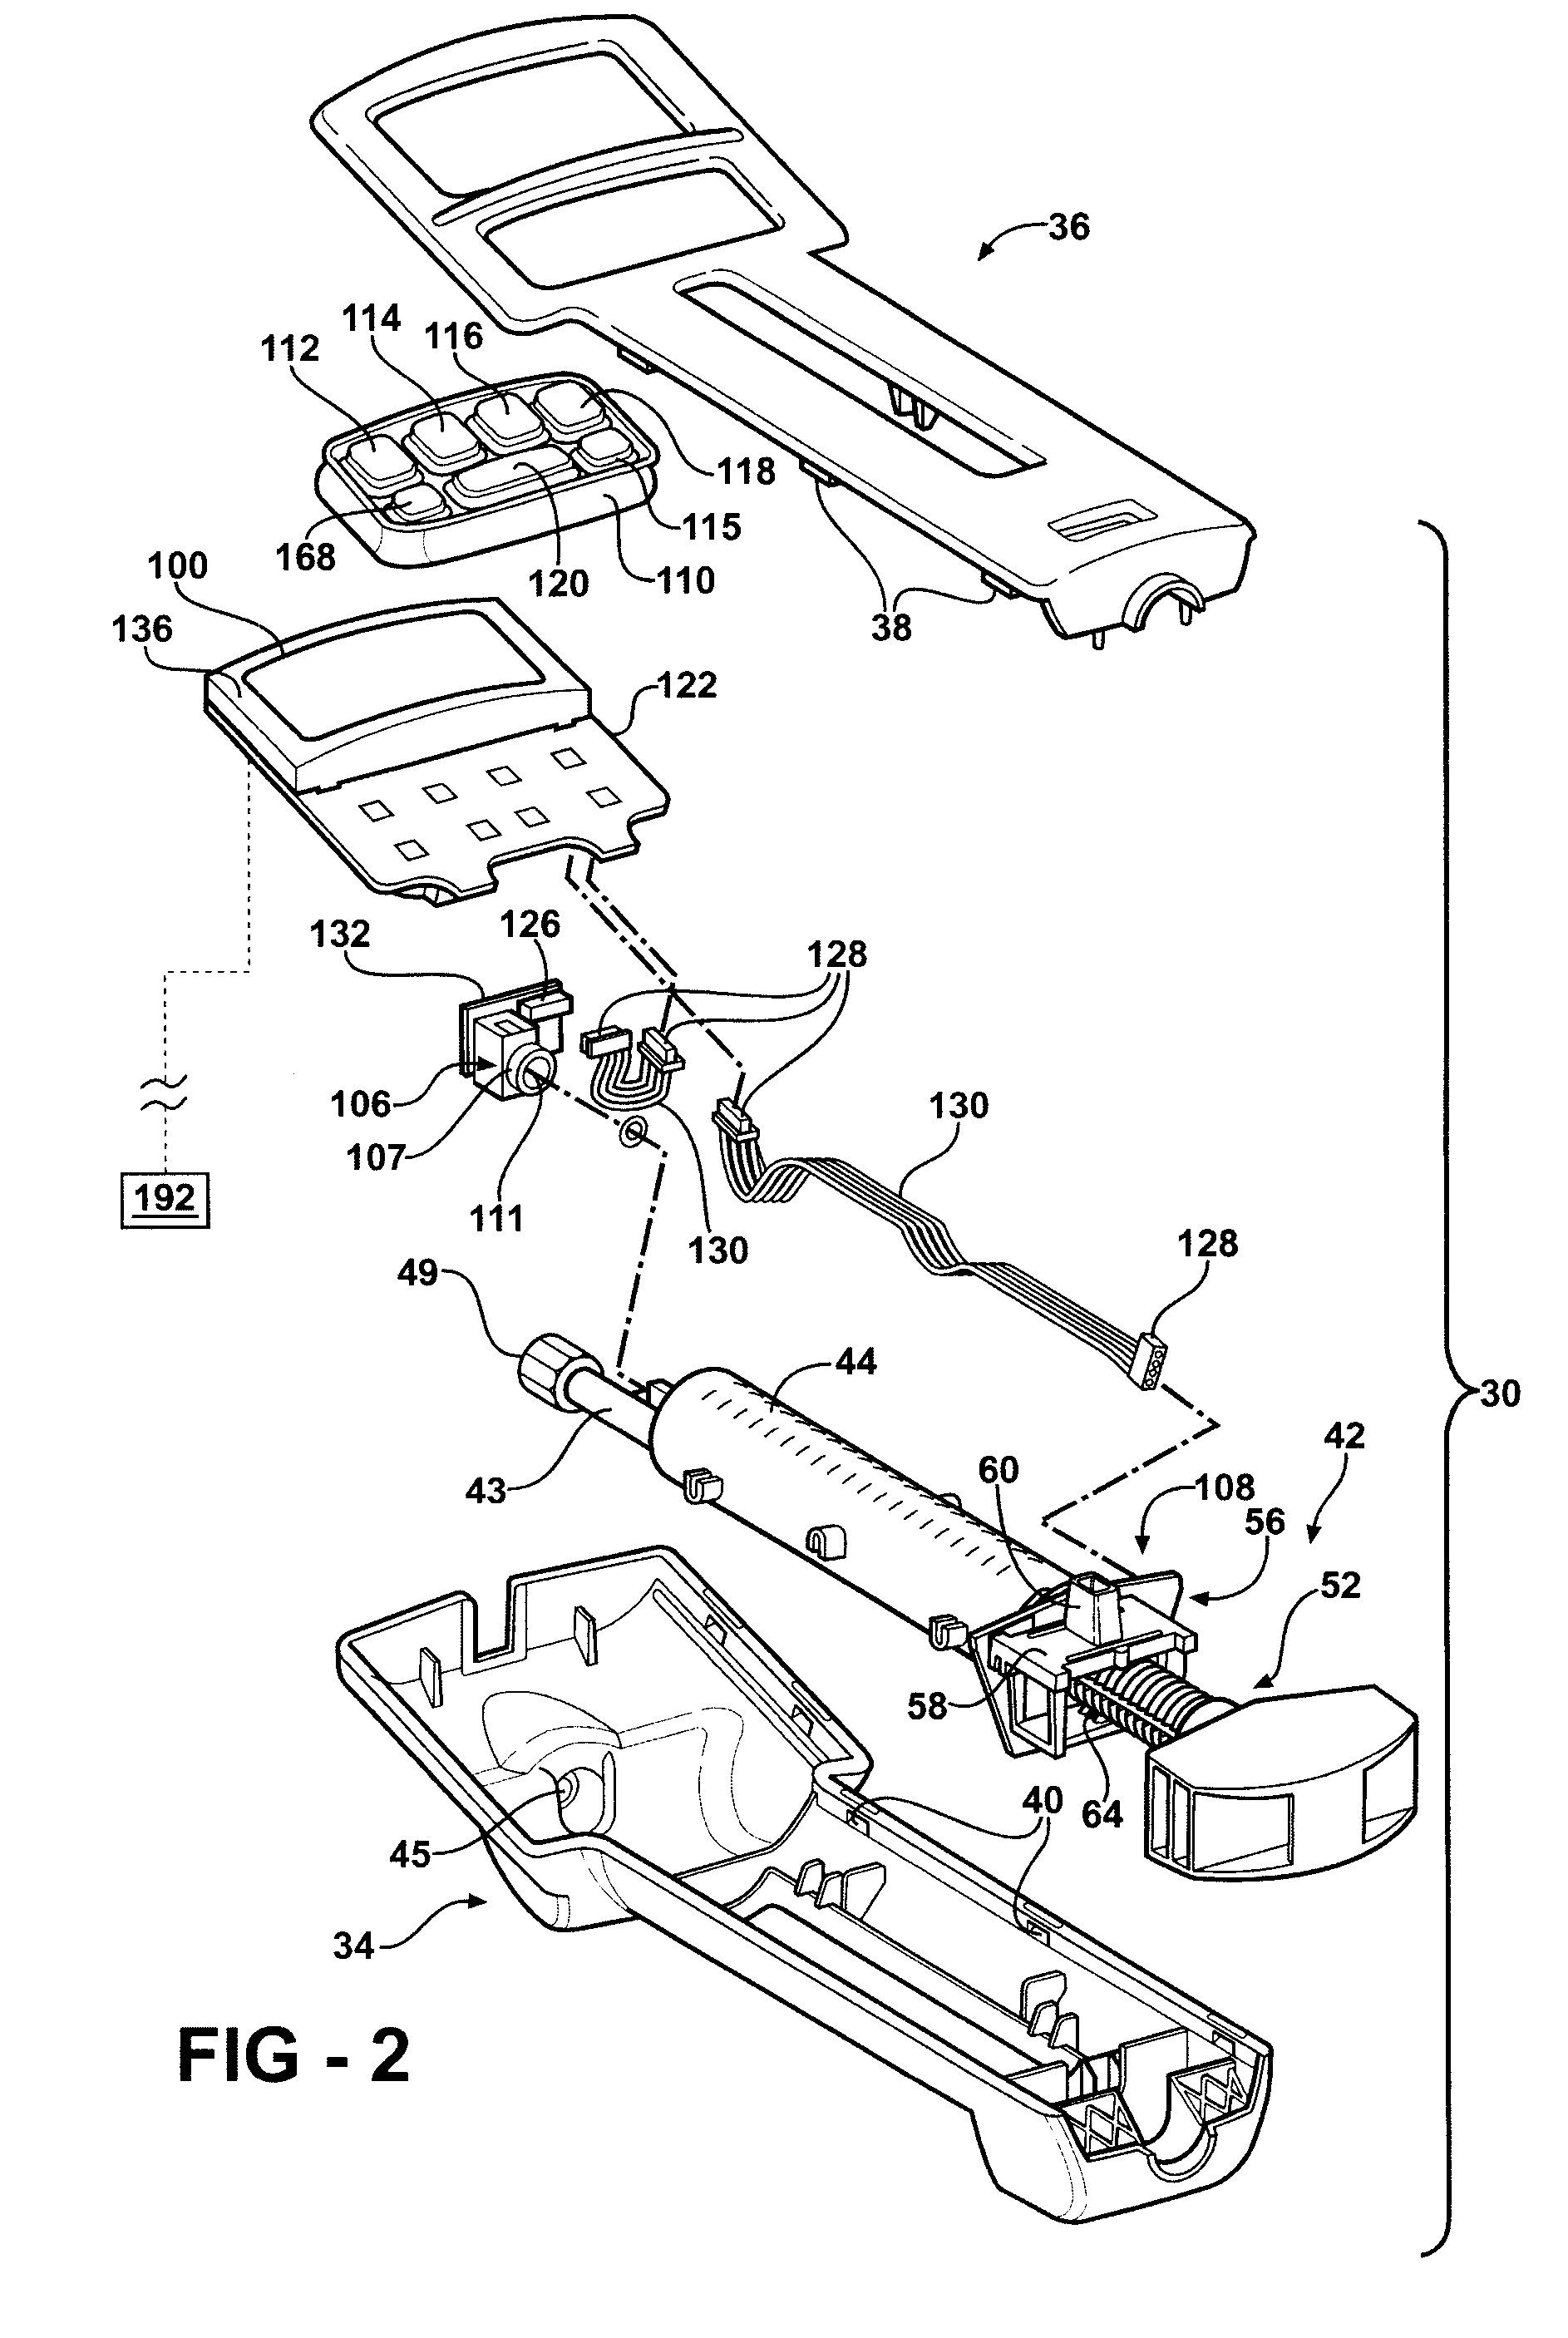 Hand-held fluid delivery device with sensors to determine fluid pressure and volume of fluid delivered to intervertebral discs during discography